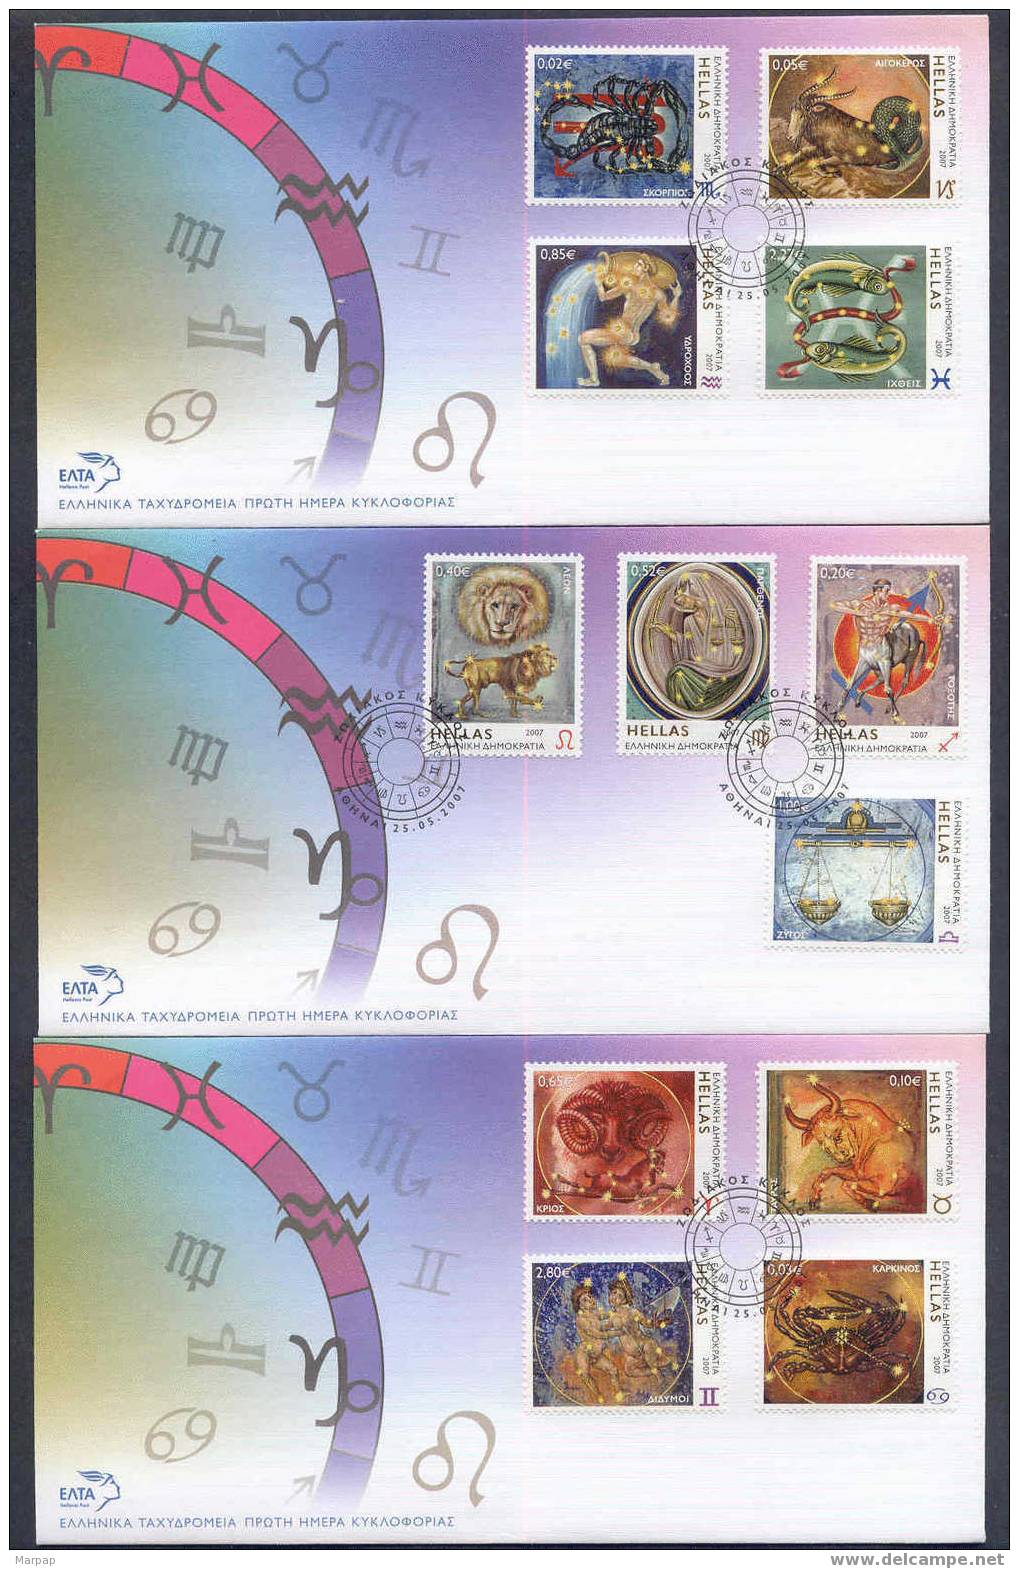 Greece, 2007 4th Issue, FDC - FDC